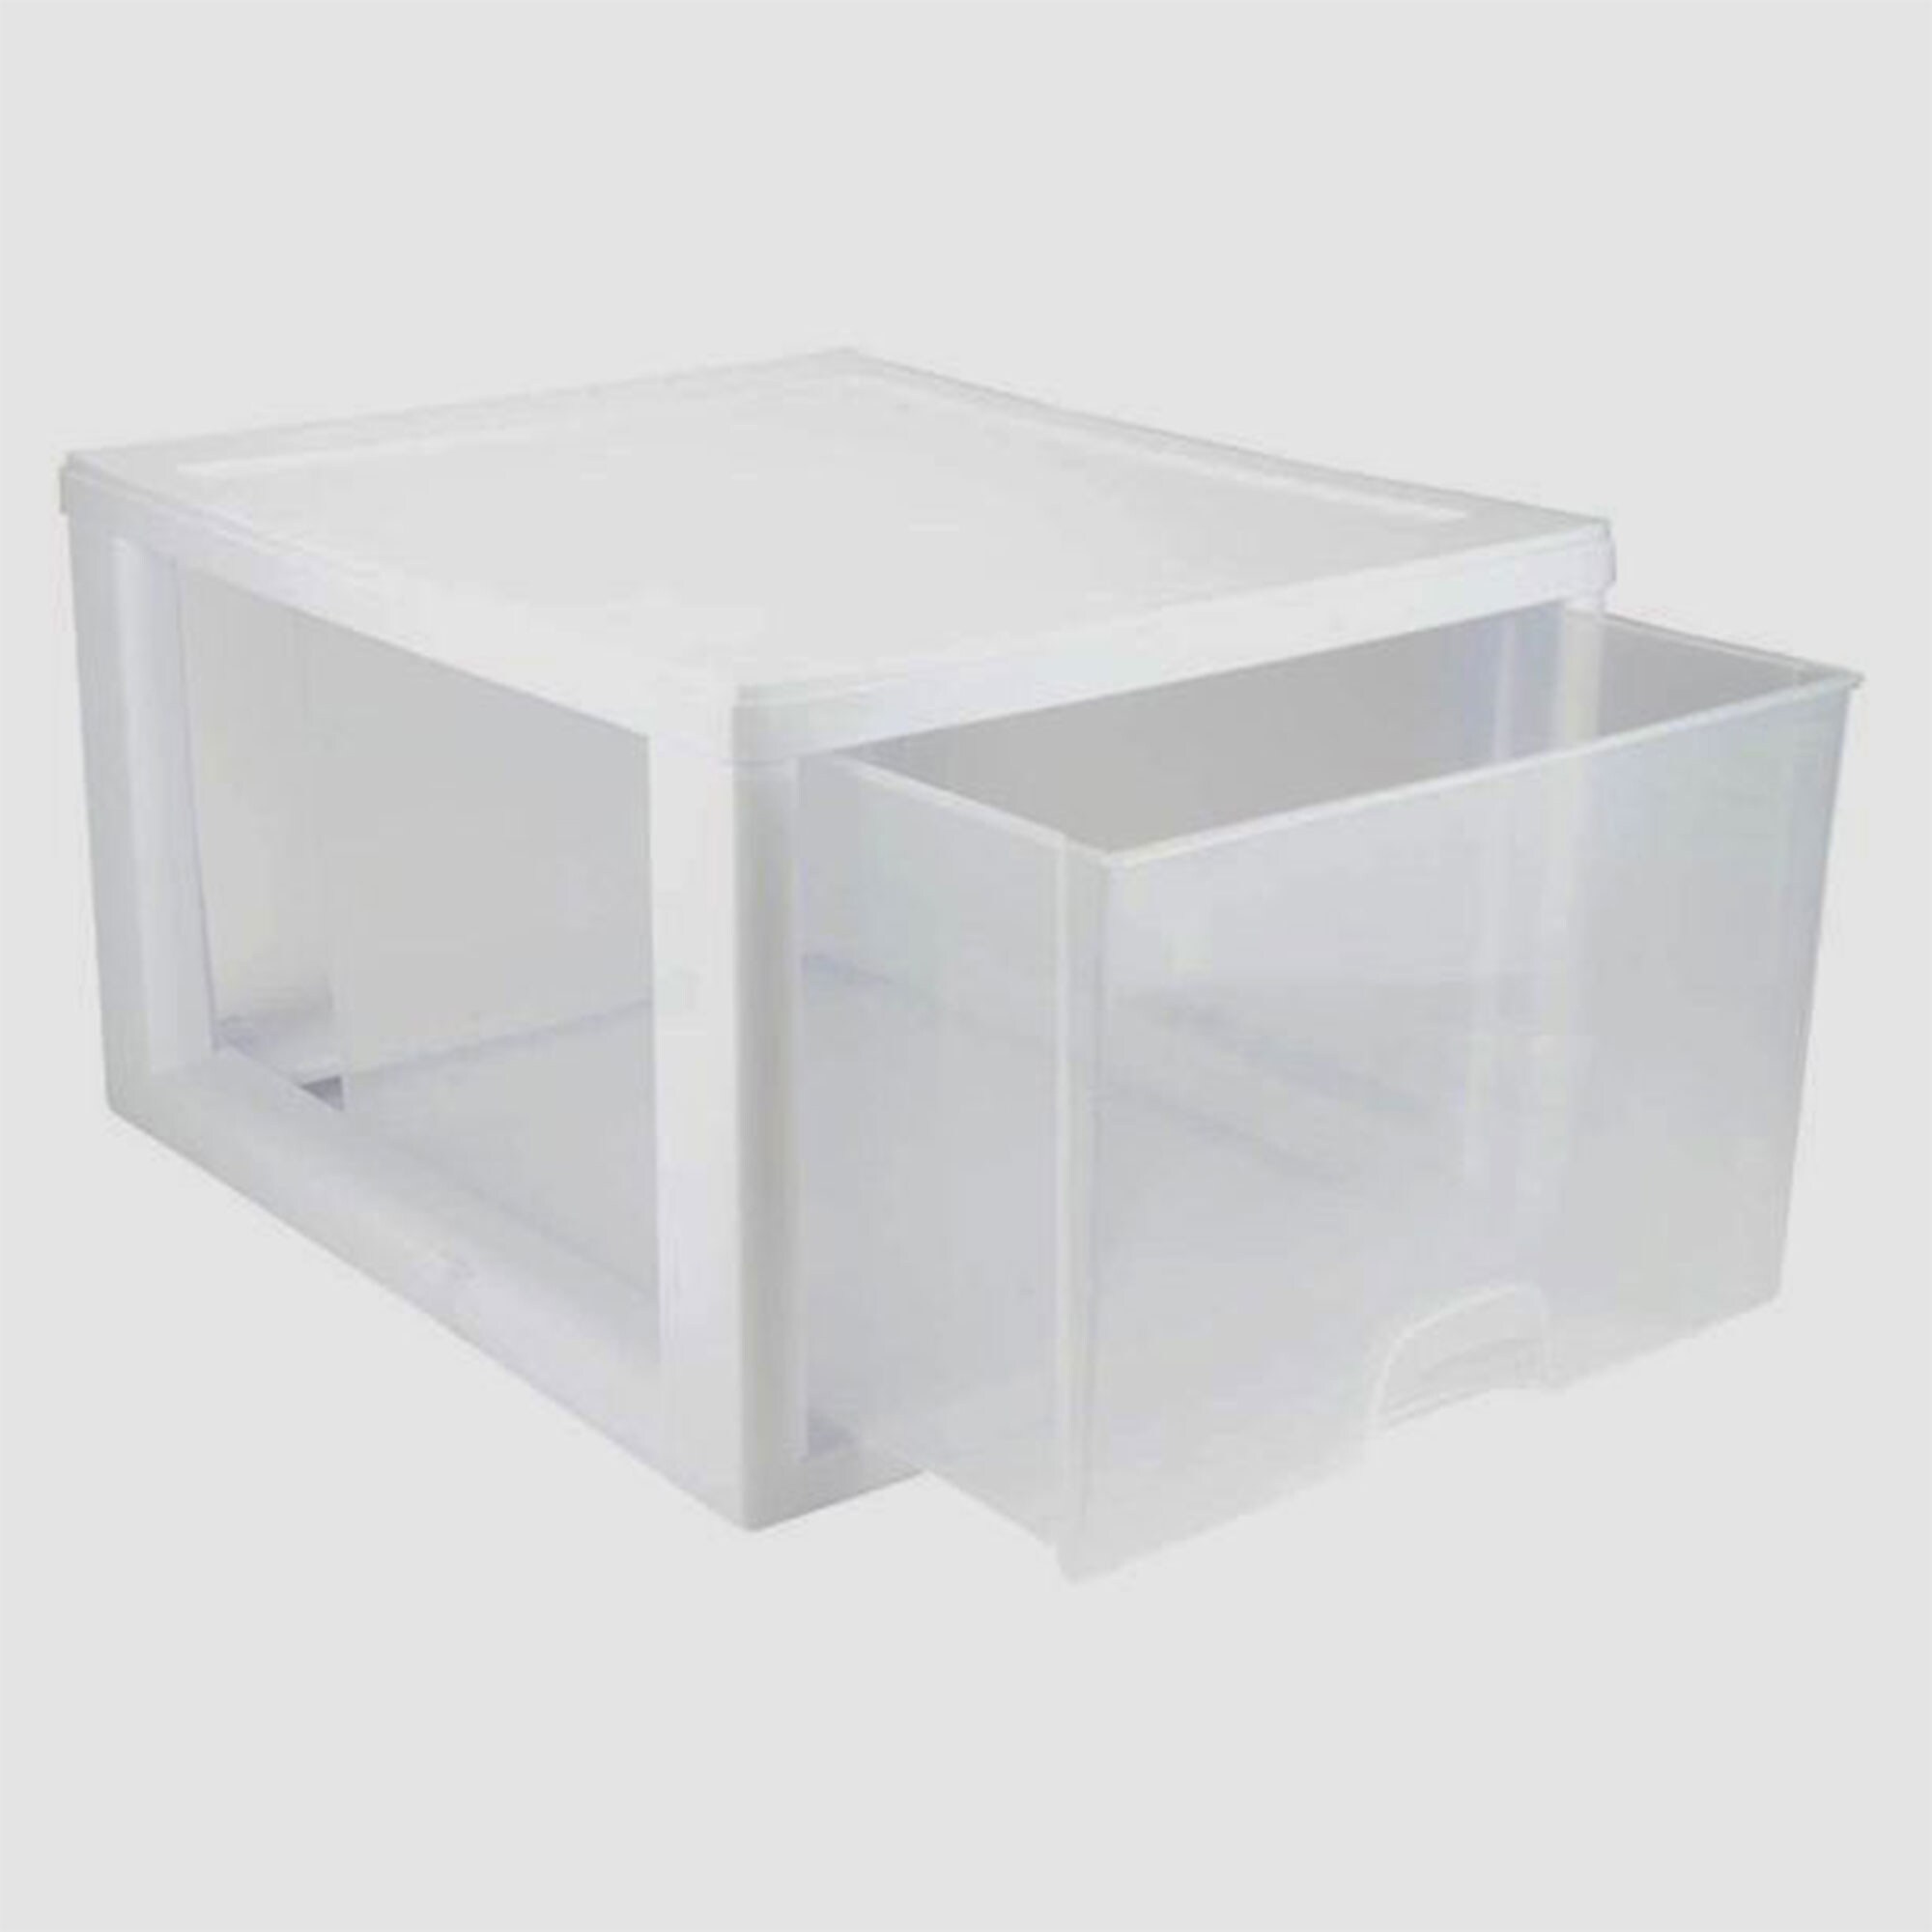 Sterilite Gasket Boxes, stacked up with printed labels, makes